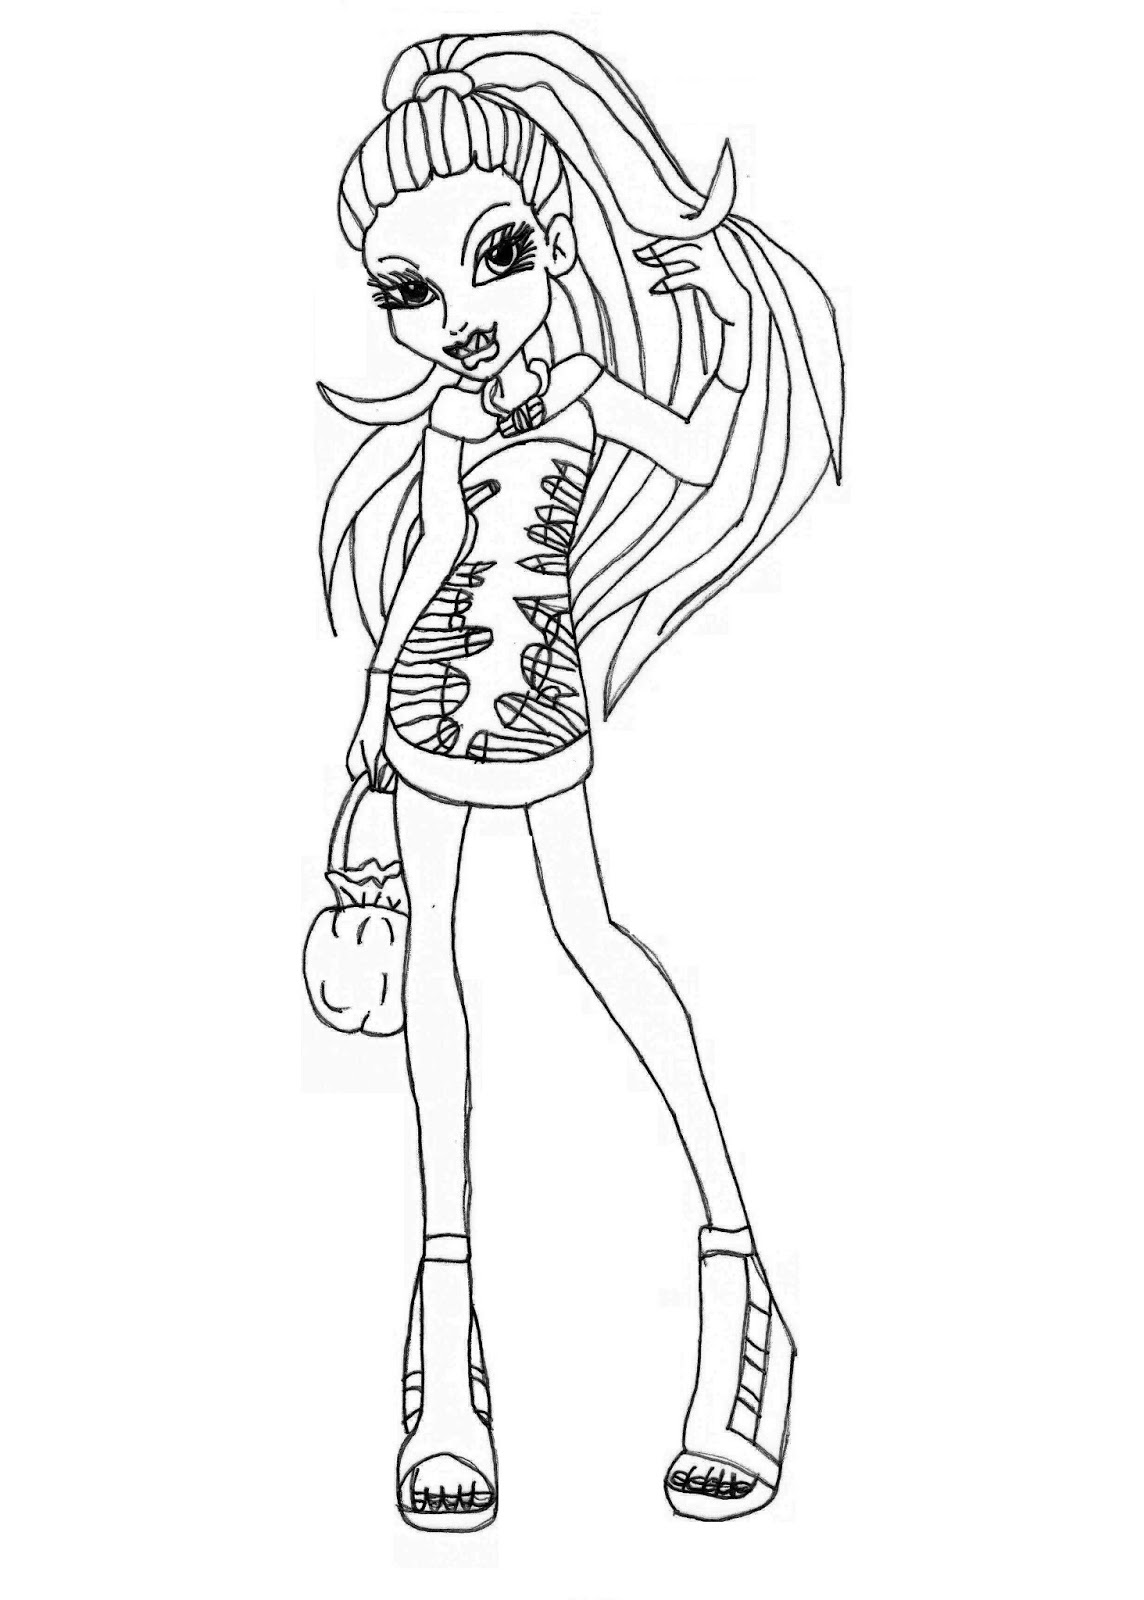 free monster high coloring pages to print free printable monster high coloring pages abbey monster pages coloring to free print high 